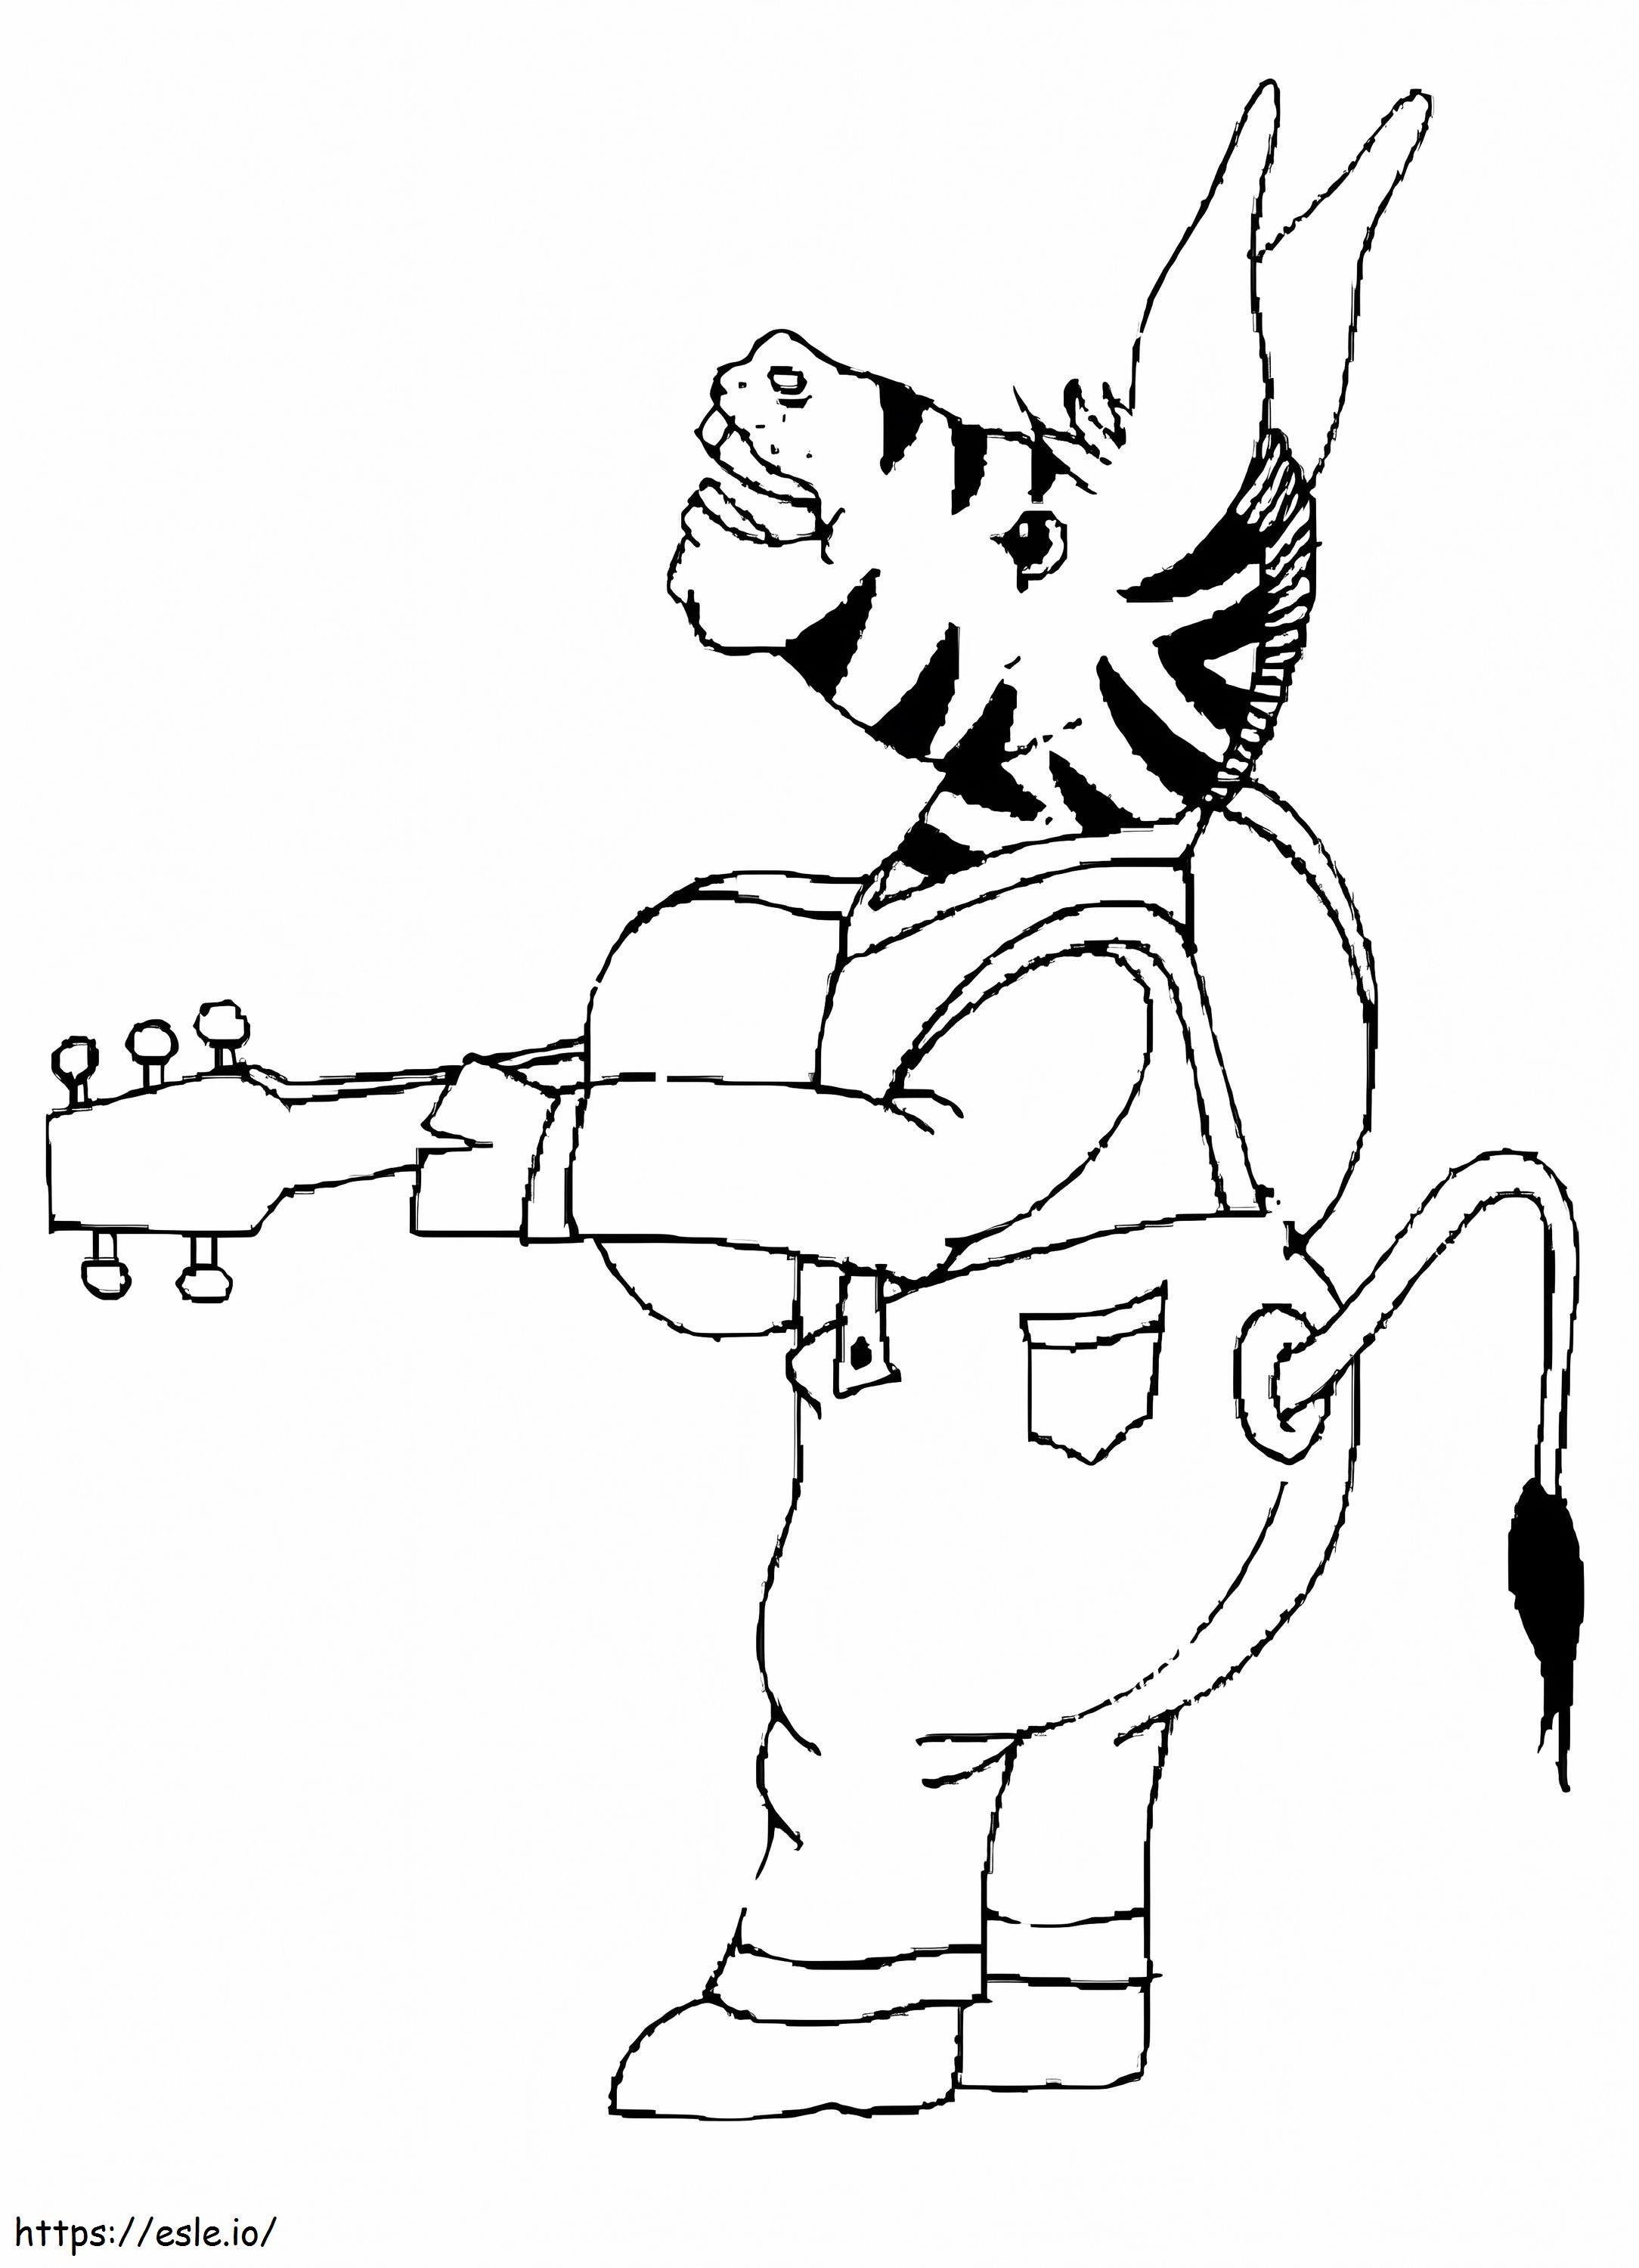 Zebra Playing Guitar coloring page